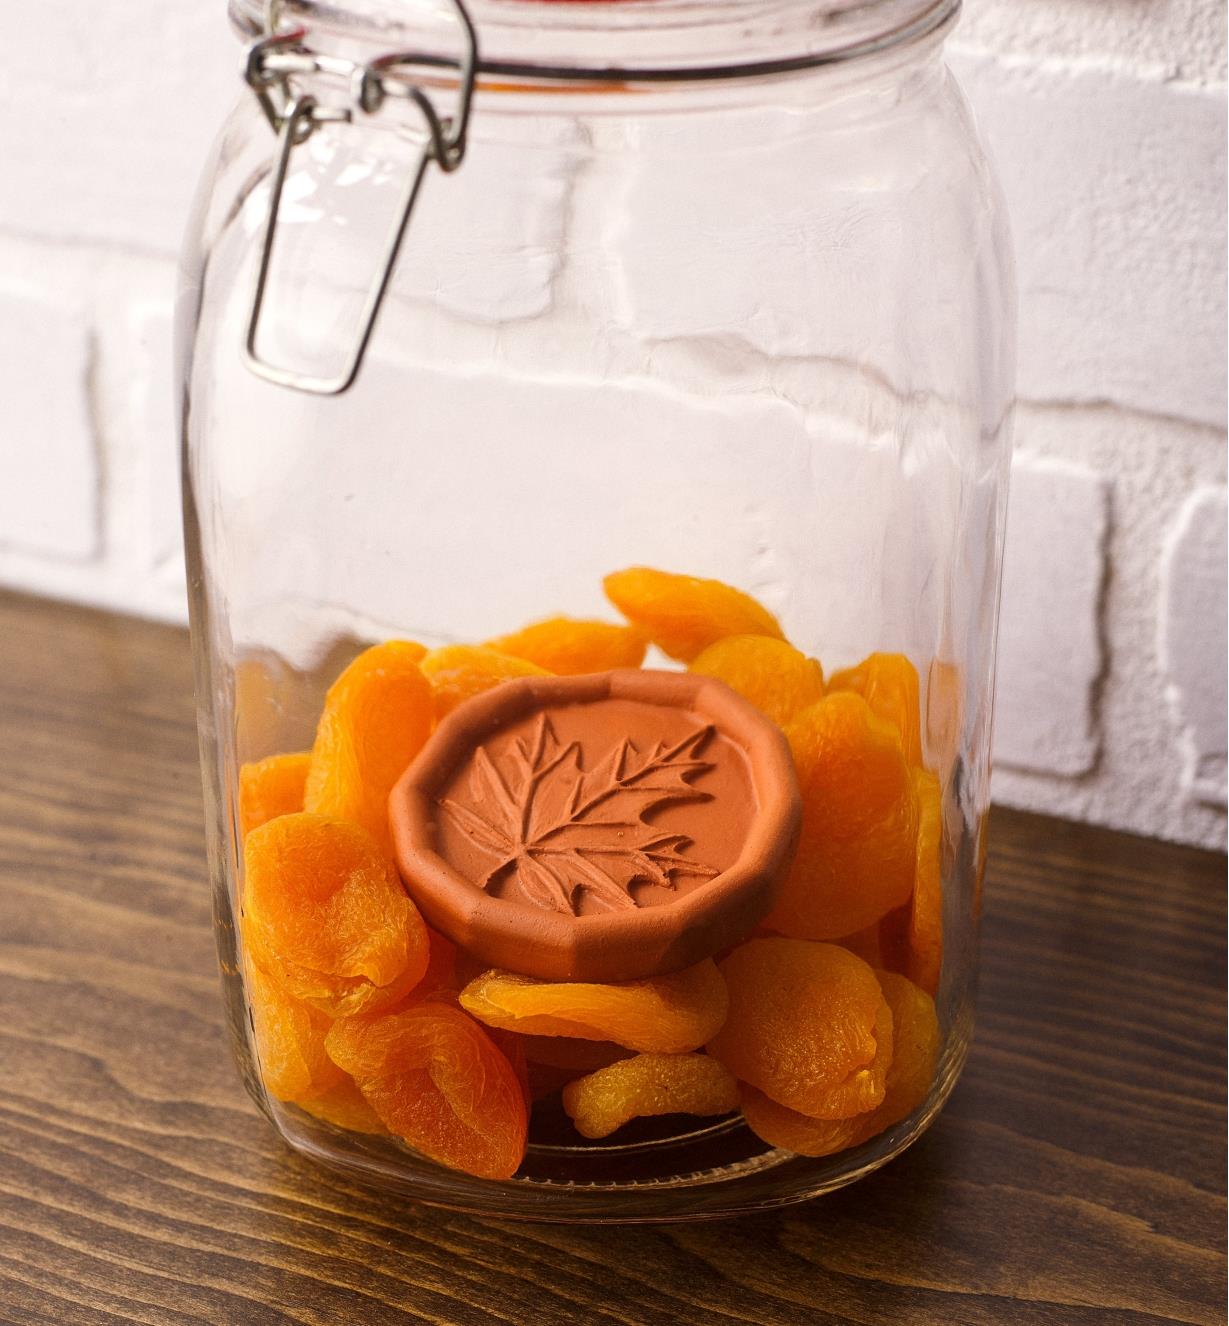 The brown sugar saver with dried fruit in a sealed jar